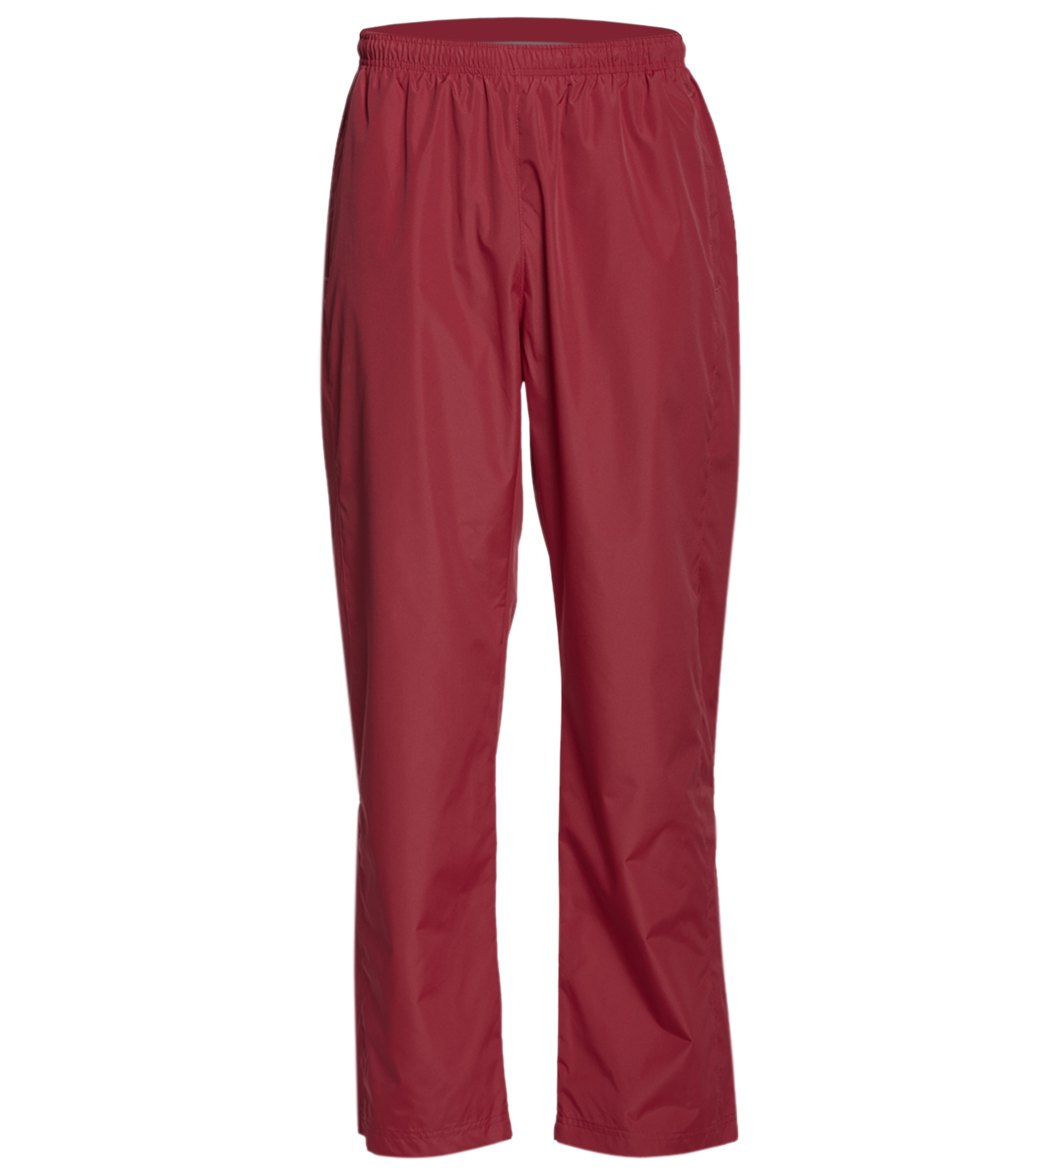 Women's Warm Up Pants - Maroon 2Xl Polyester - Swimoutlet.com